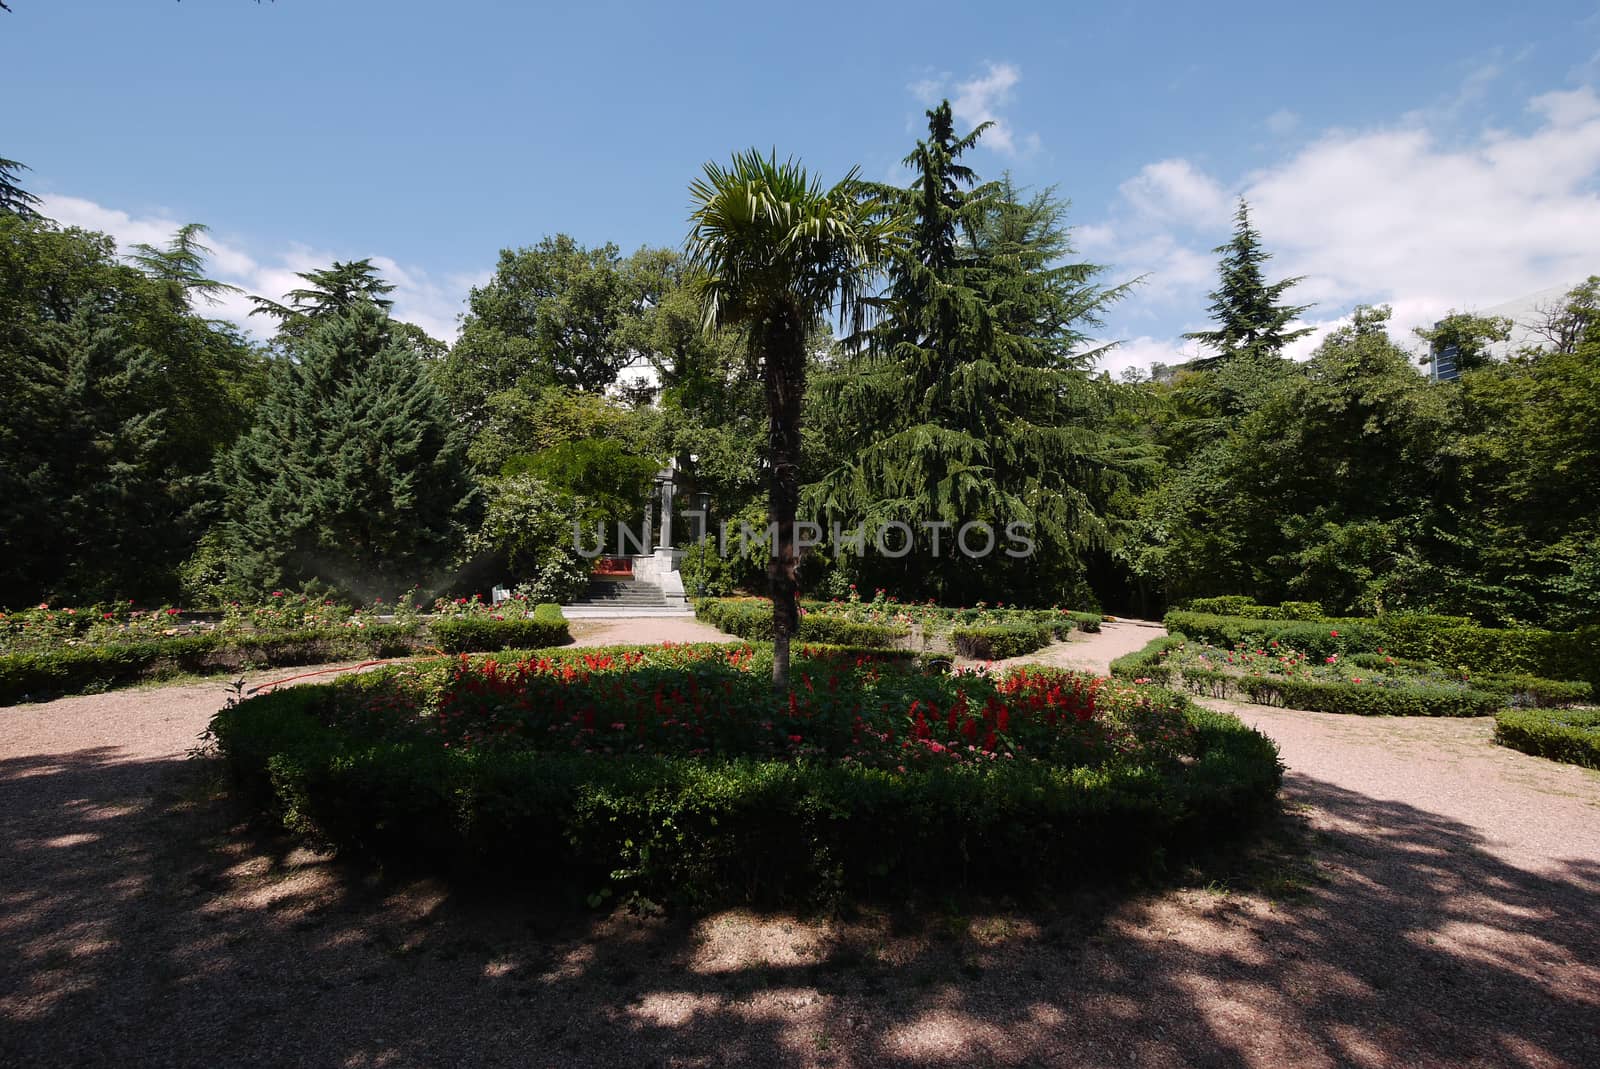 A flower bed with small ornamental flowers, green bushes and a high exotic palm tree by Adamchuk